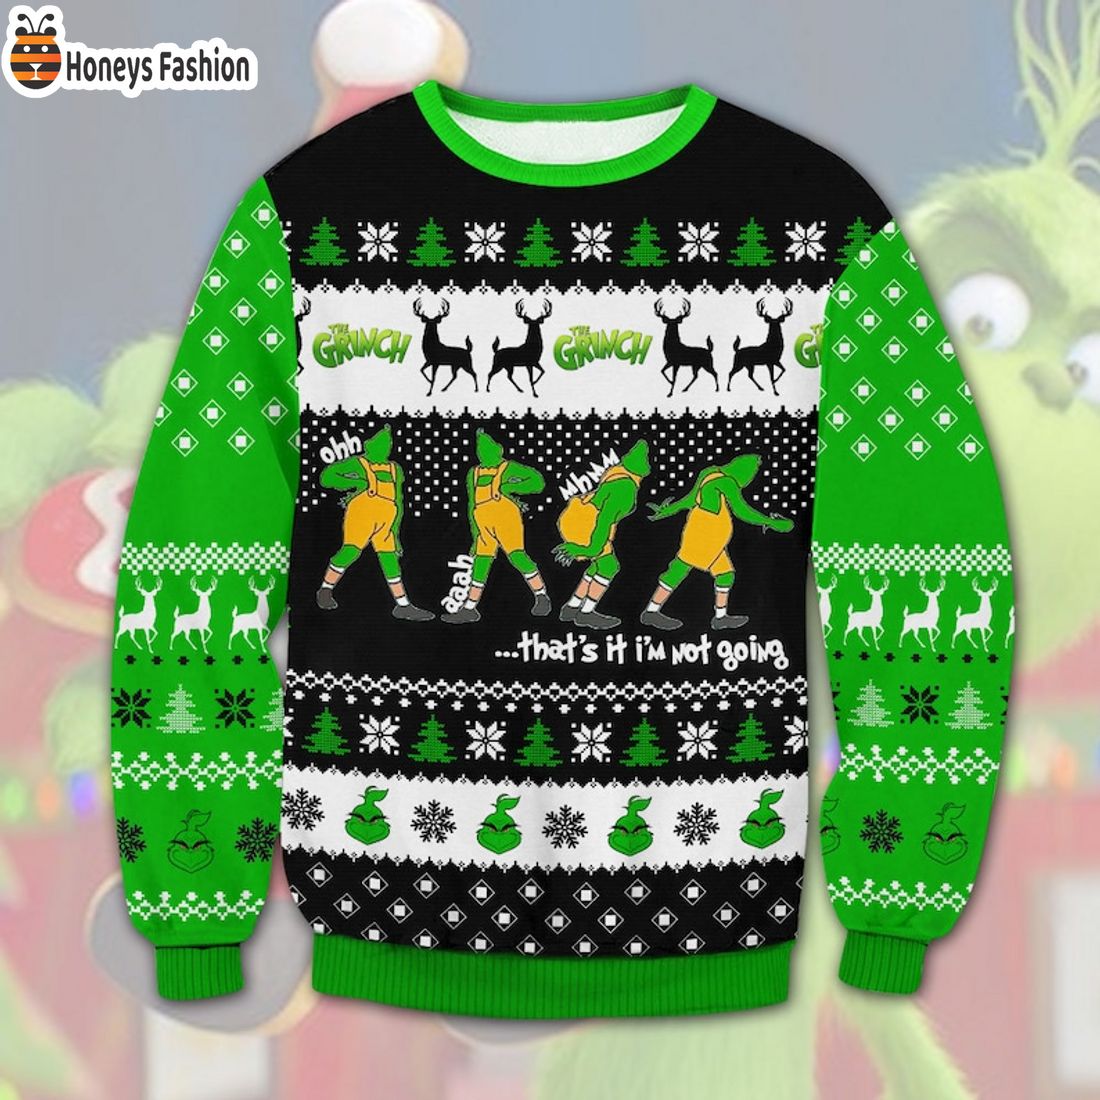 PRODUCT The Grinch That’s It I’m Not Going Christmas Ugly Sweater